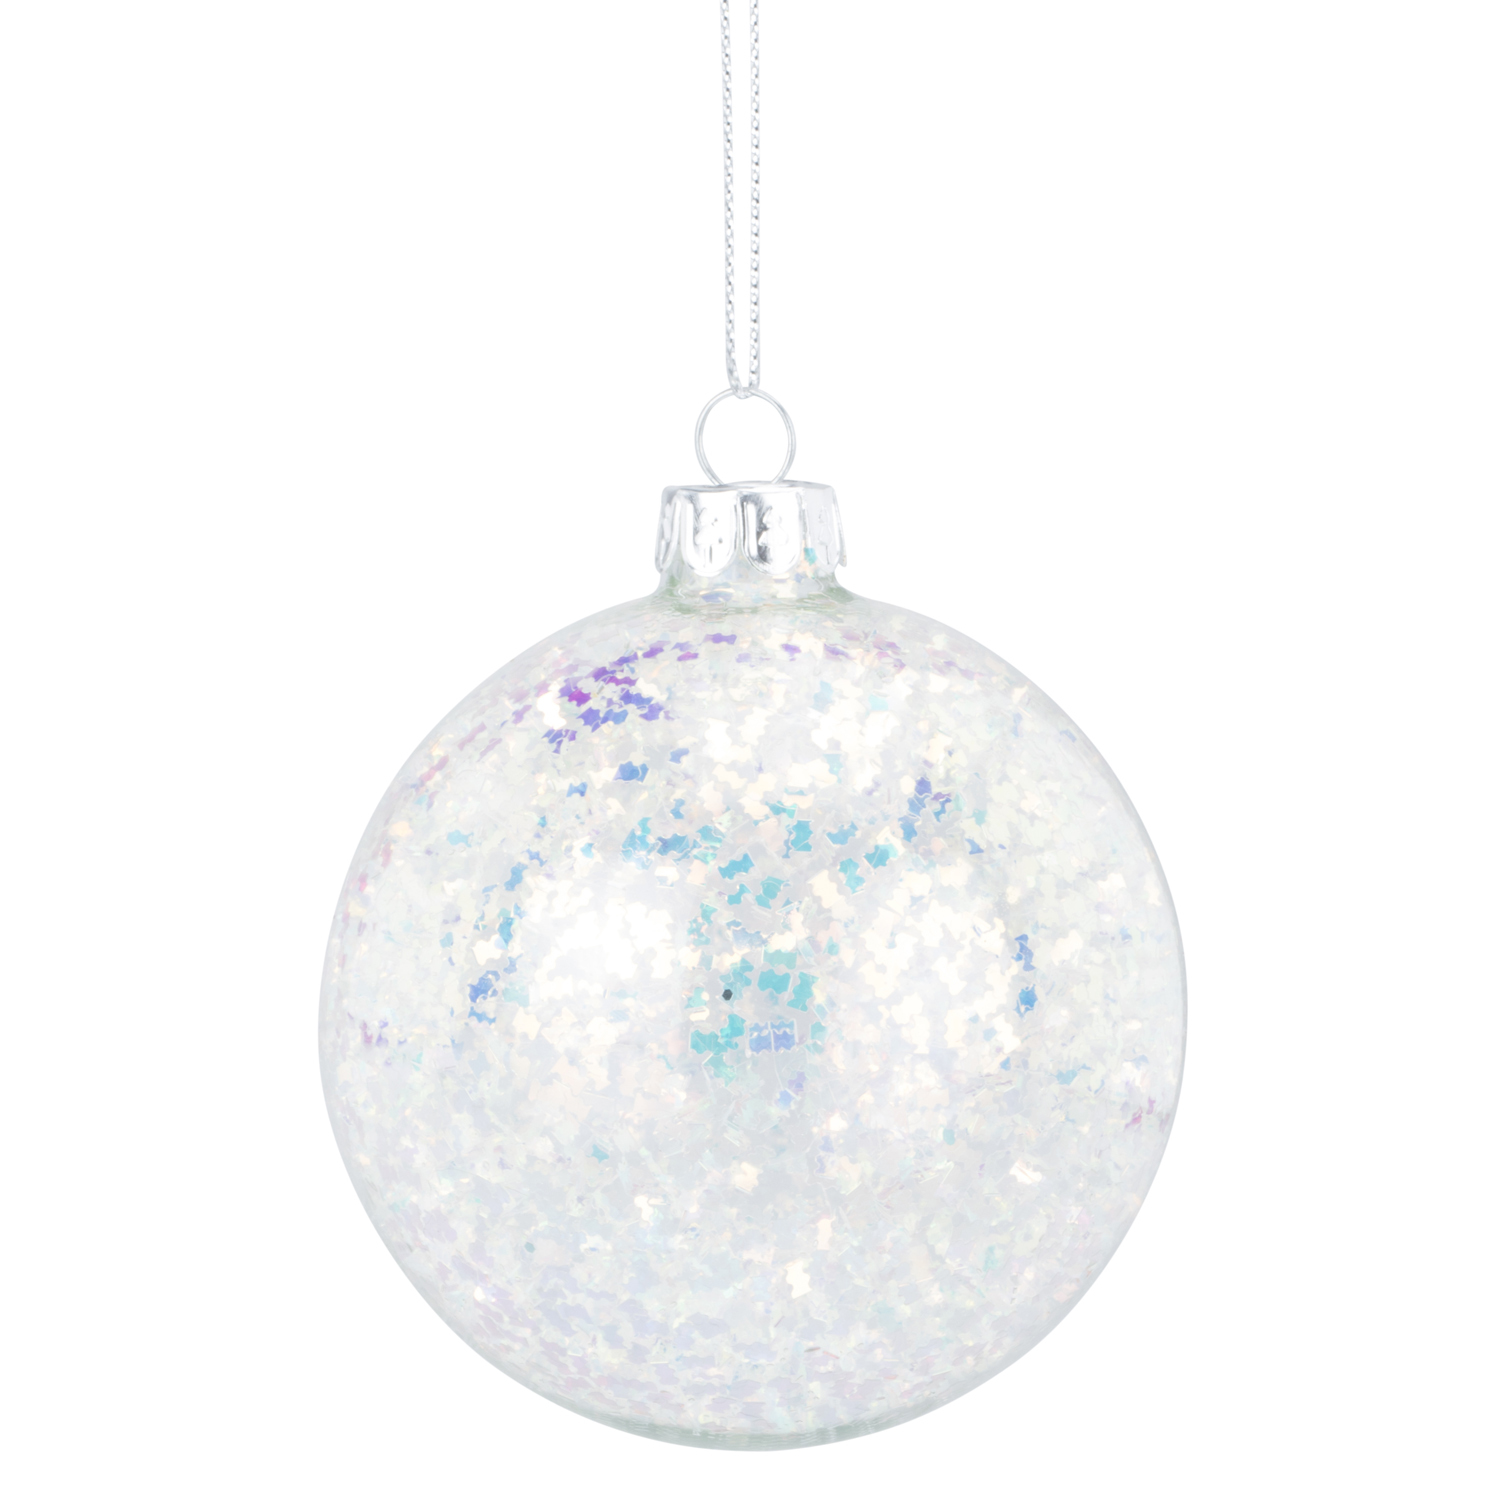 Iridescent Glitter Christmas Bauble - Clear Image